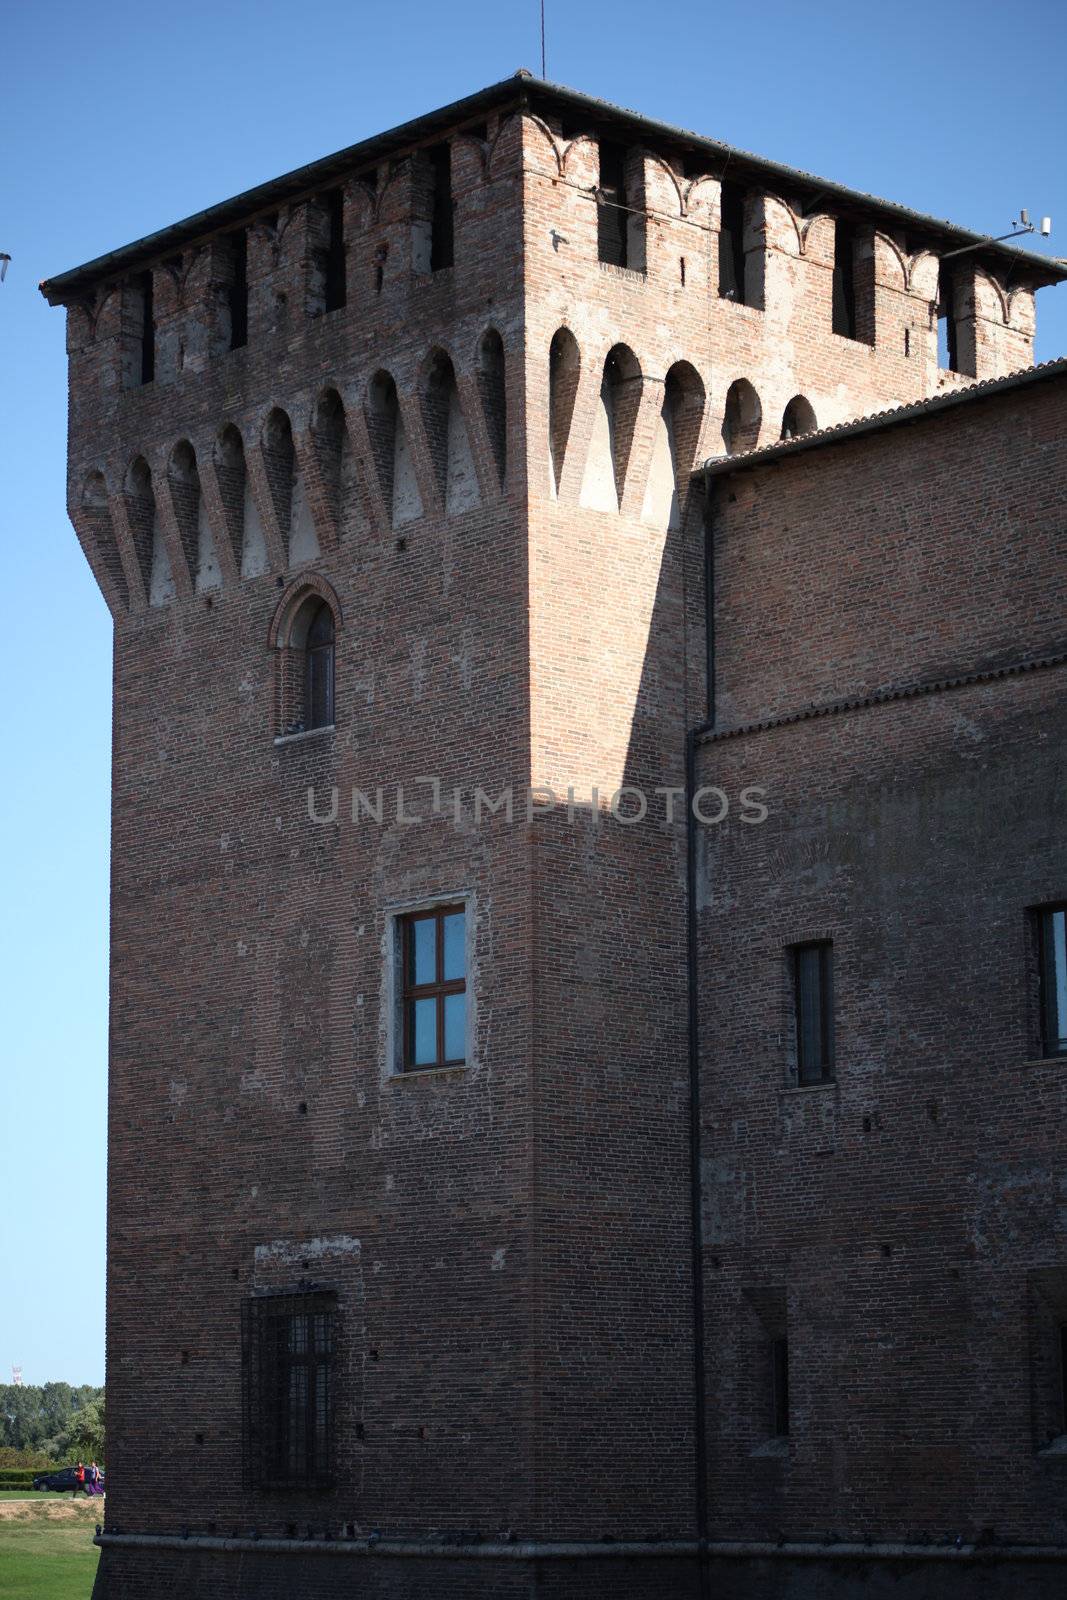 St George castle details in Mantua, Italy.